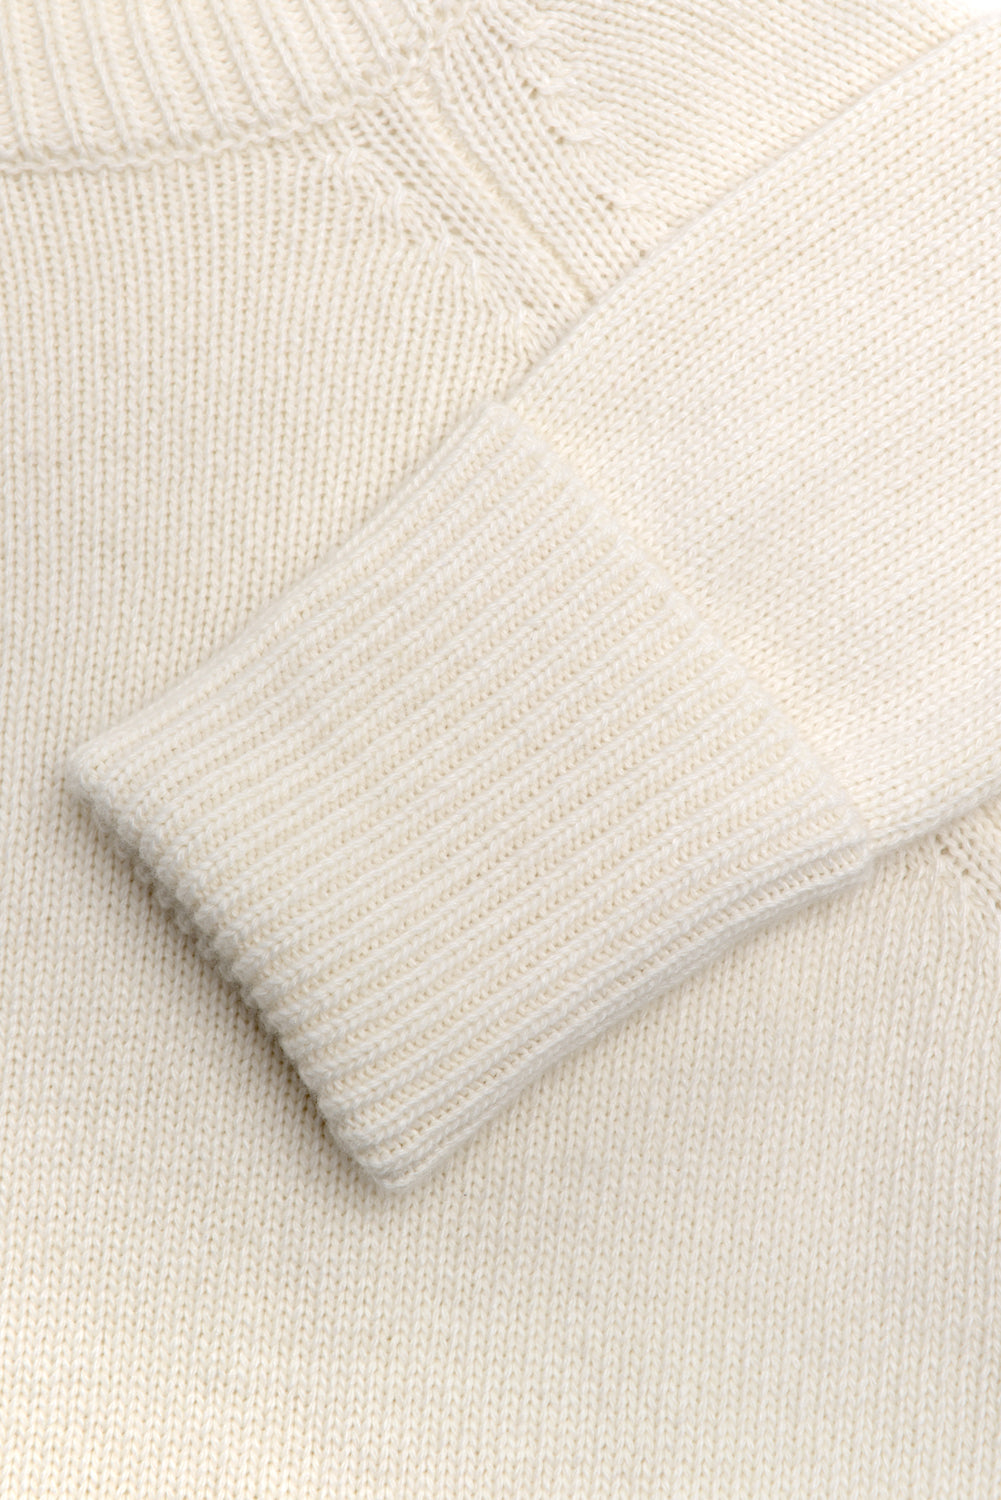 Cashmere Blend Cropped Roll Neck (Chantilly)